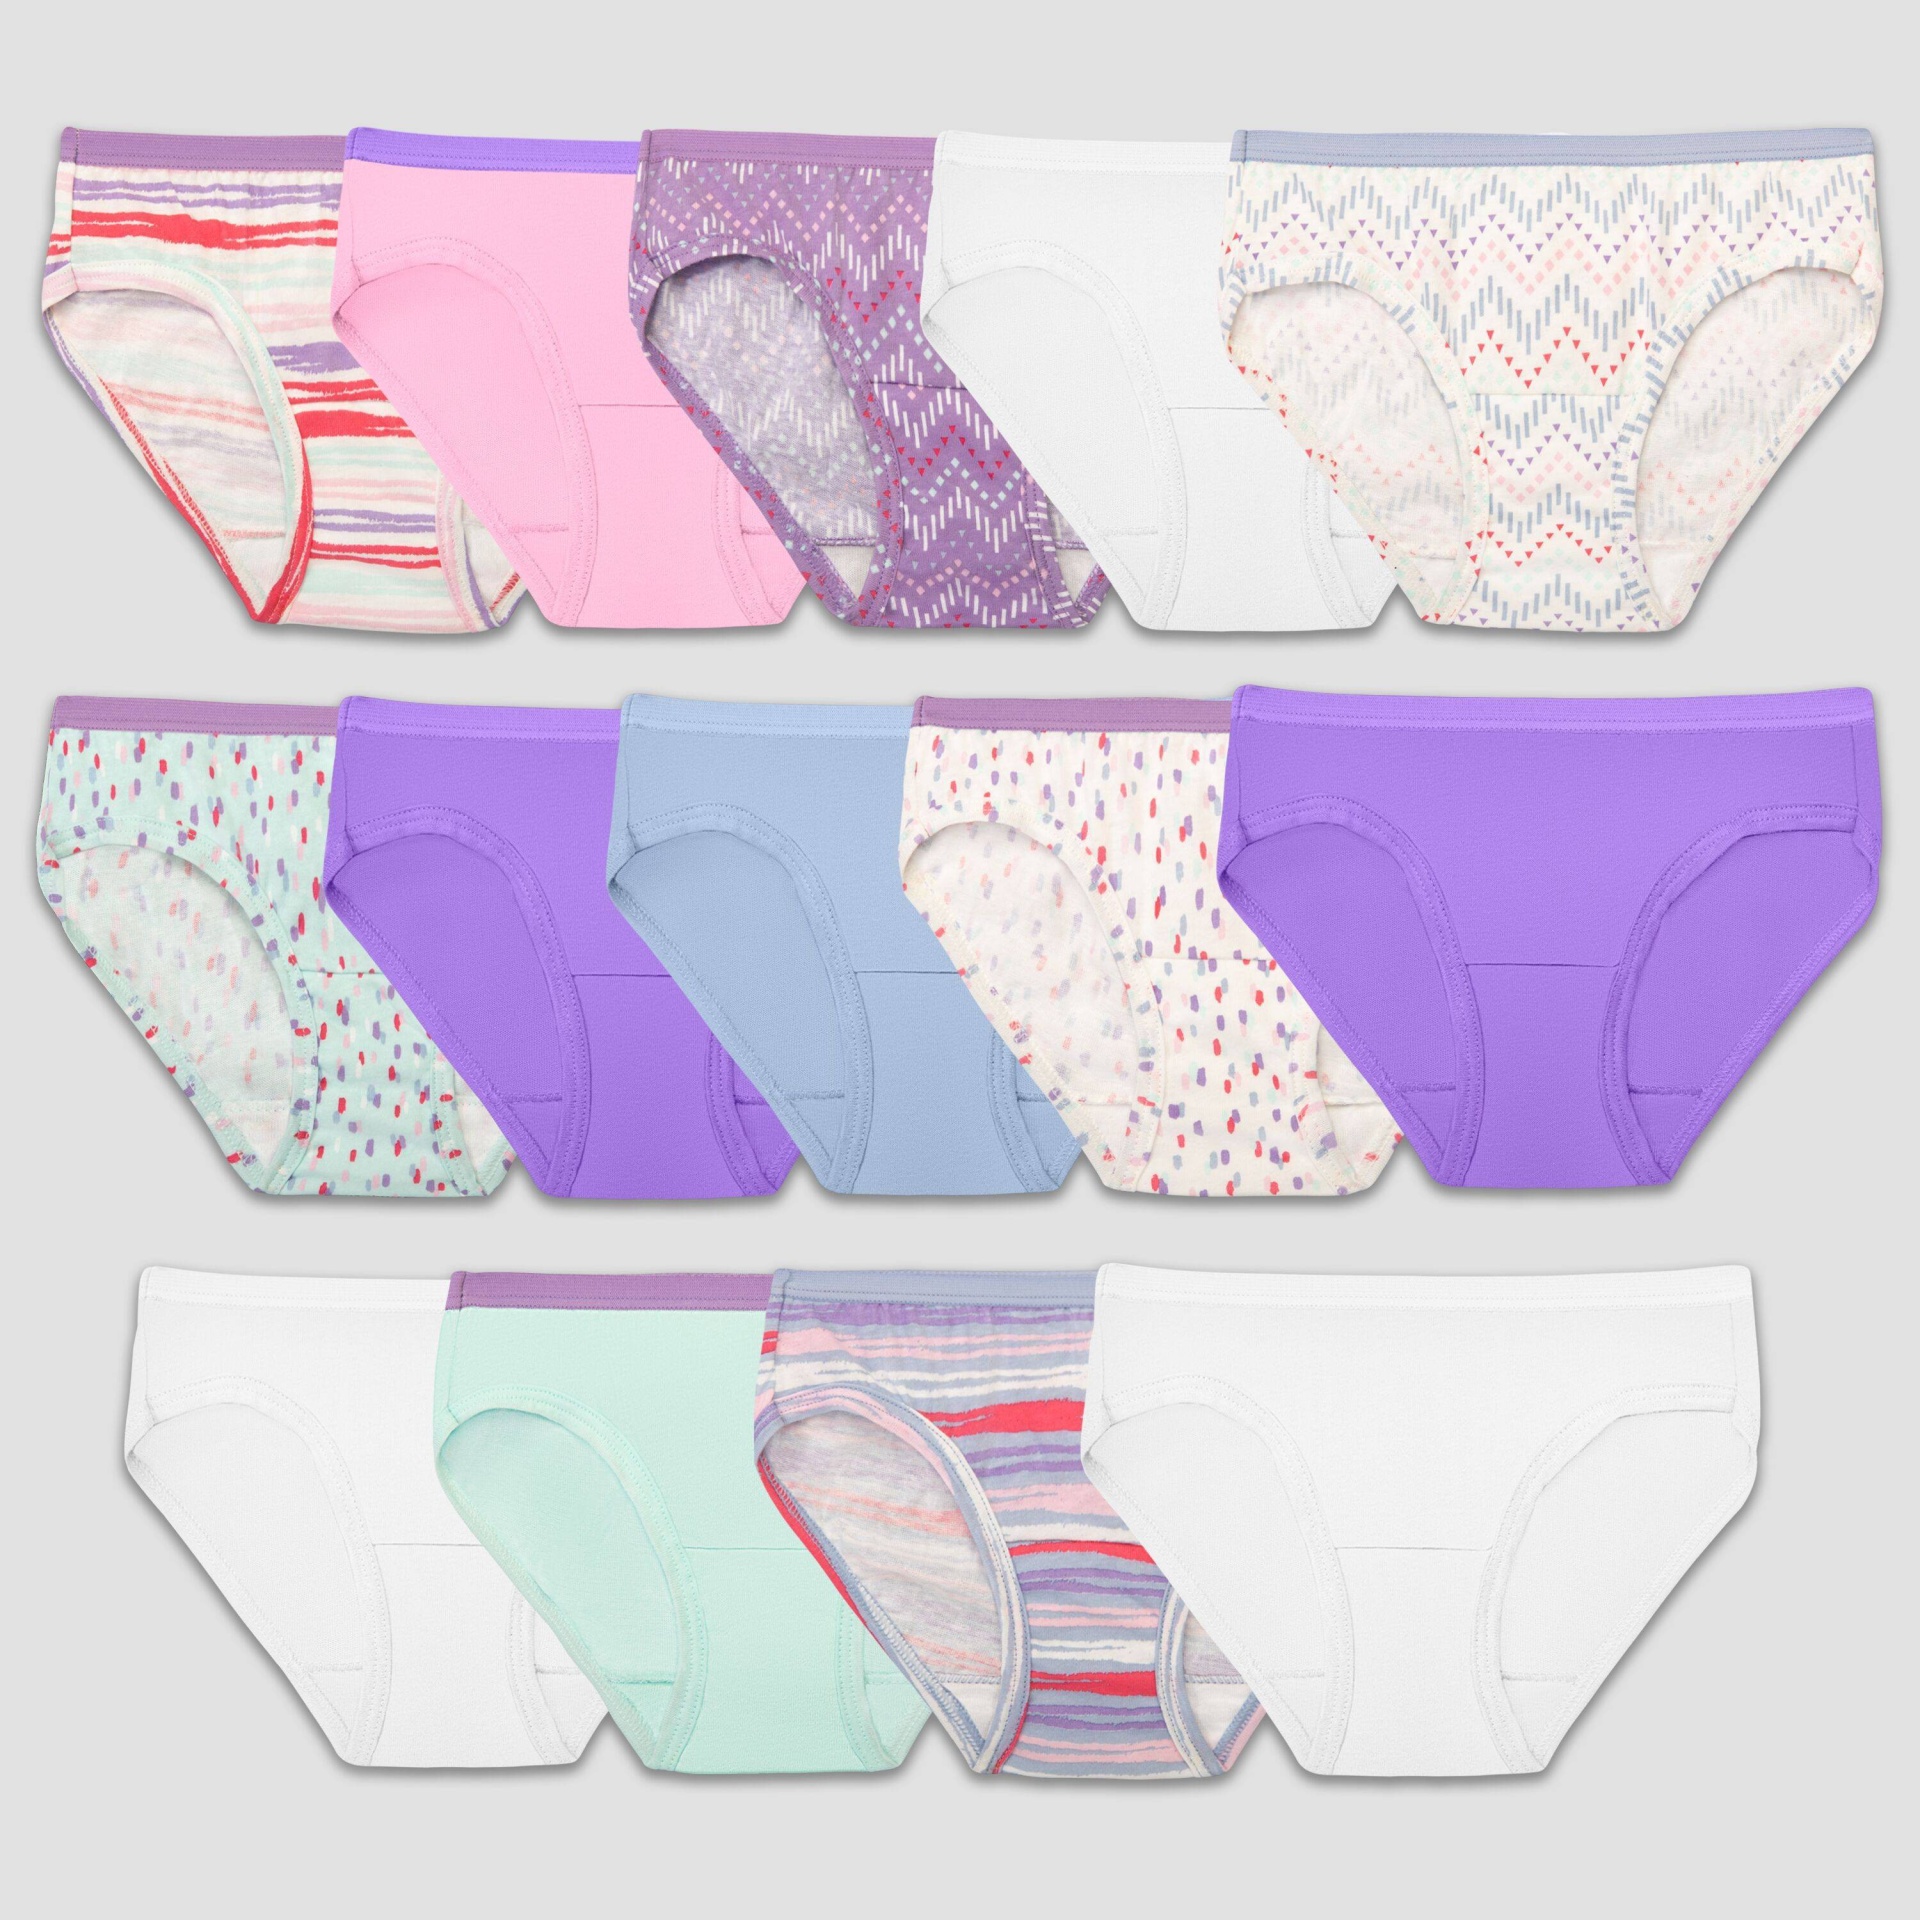 Fruit of the Loom Girls' 14pk Hipster Underwear - Colors May Vary